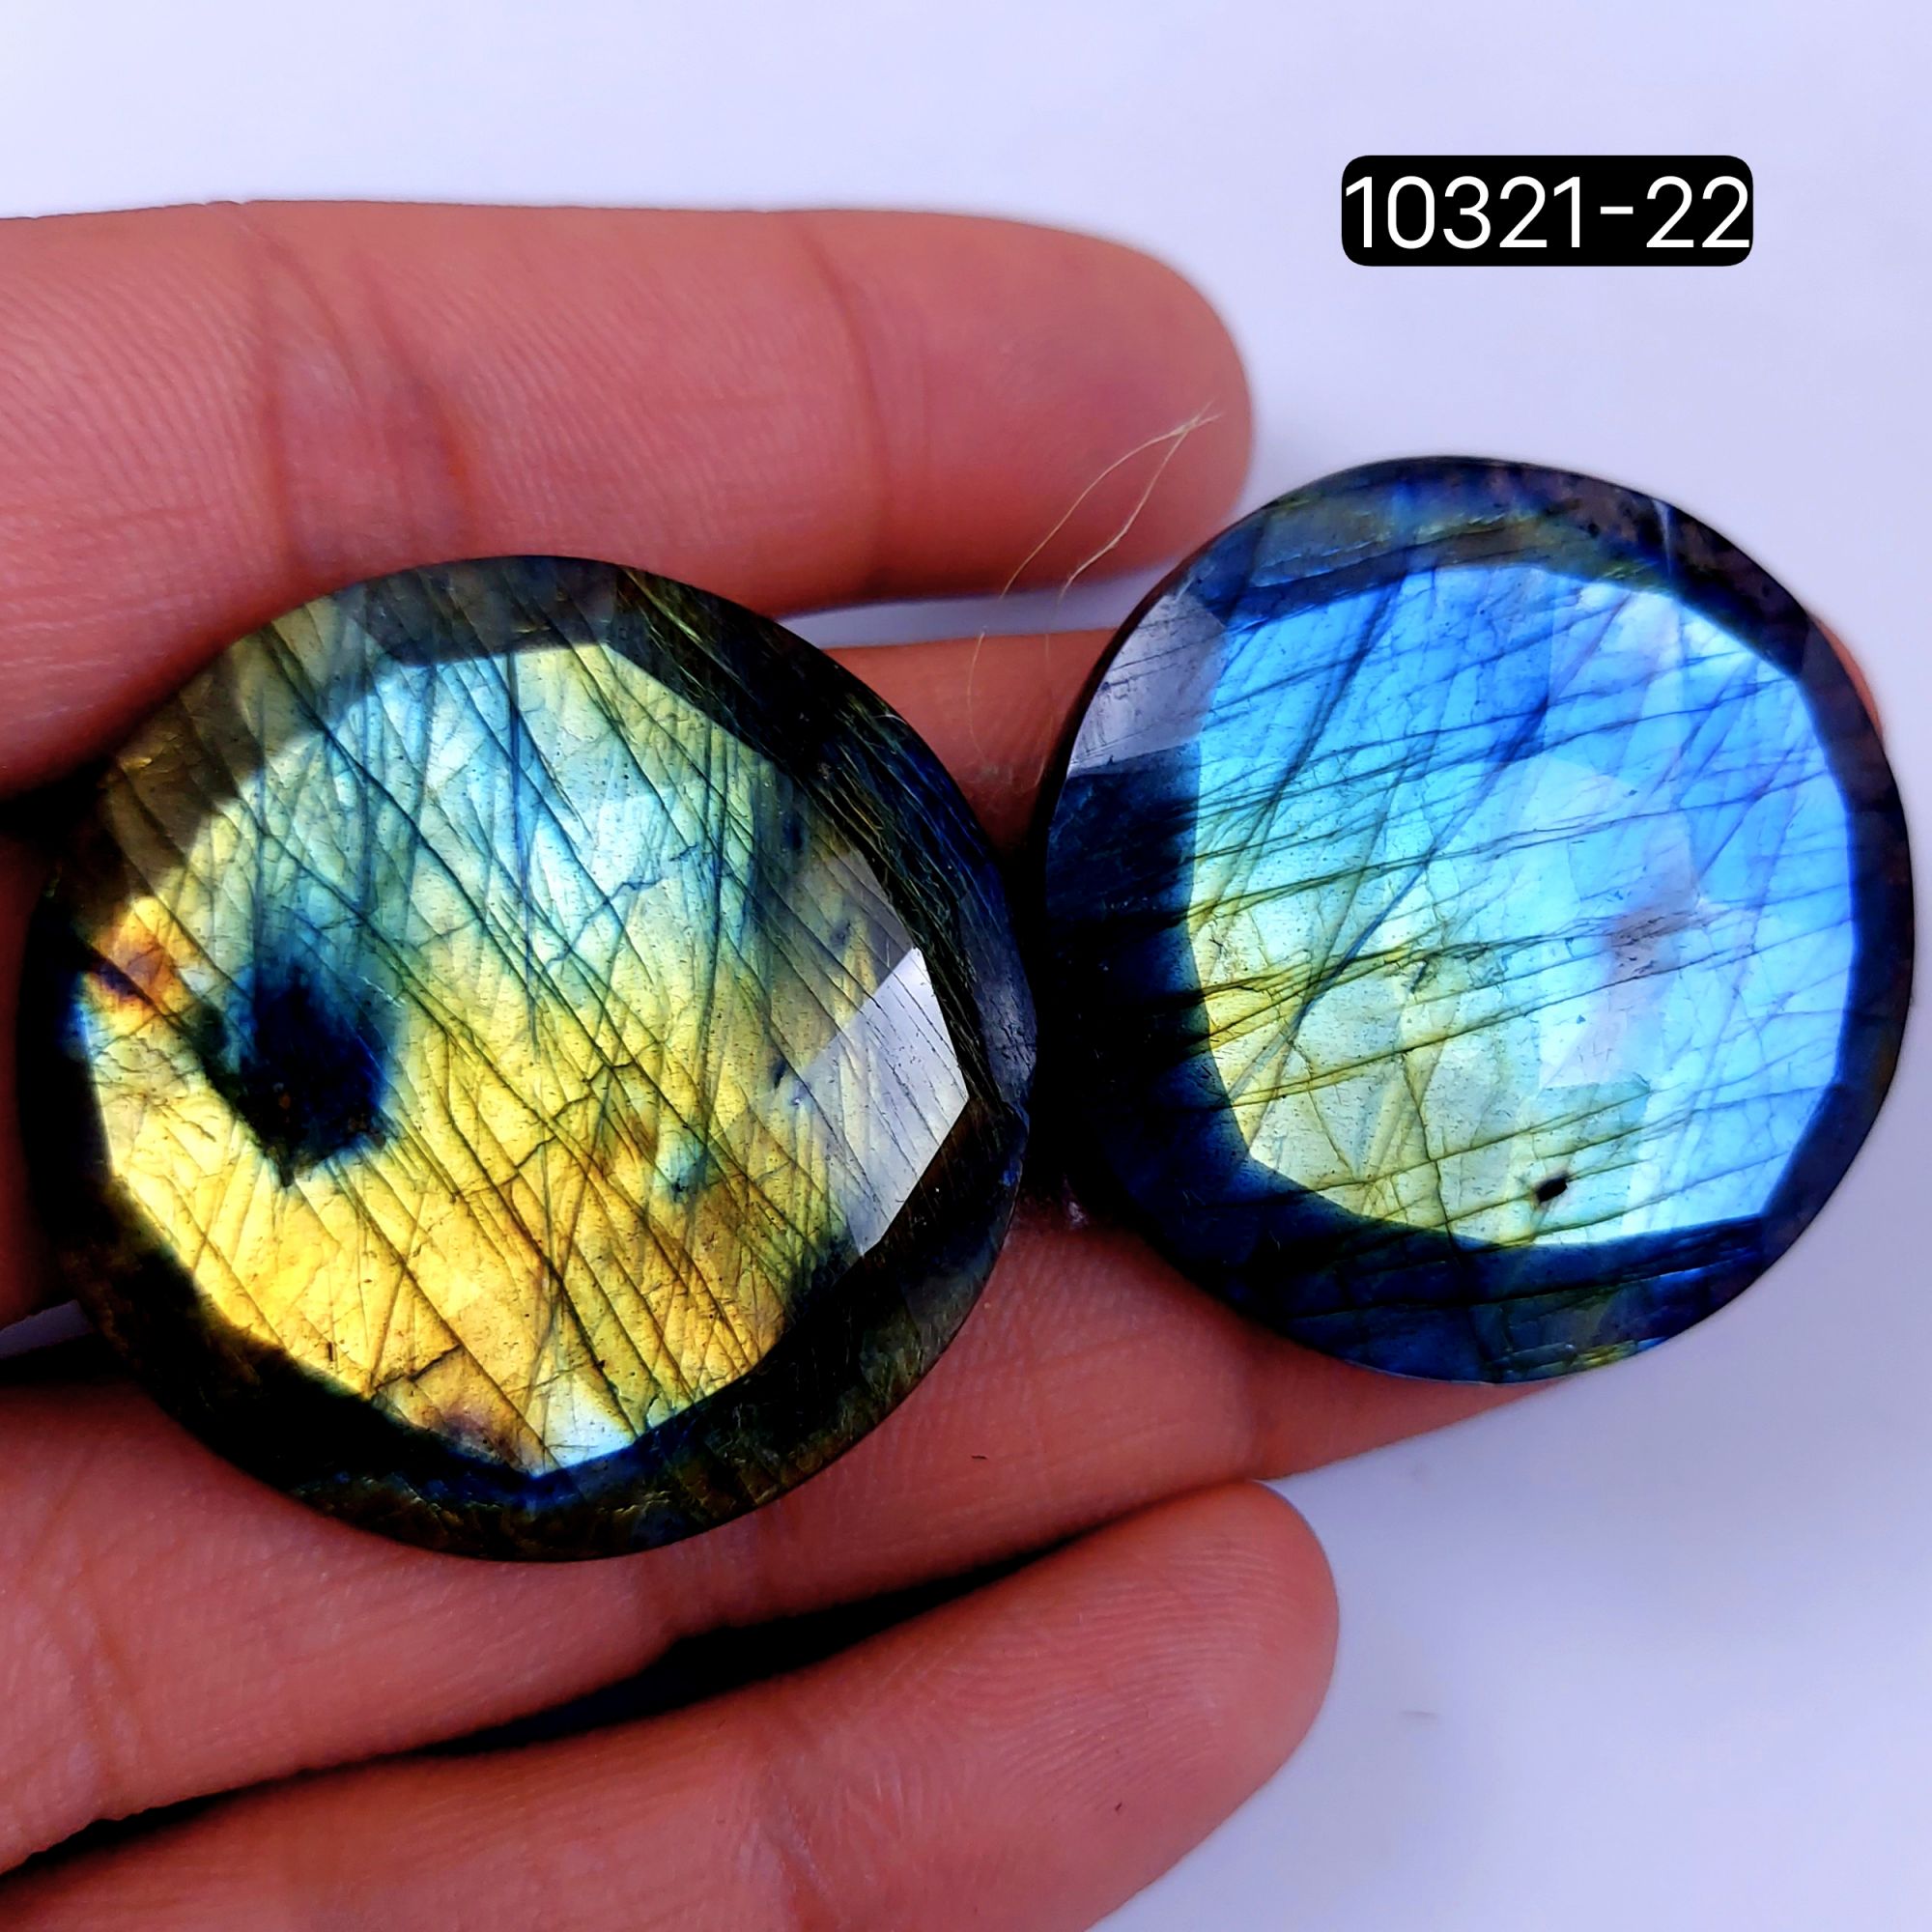 168Cts Natural Labradorite Faceted Cabochon Pair Polished Loose Gemstone Flat Back Multi Jewelry Making Crystal  35x35mm #10321-22